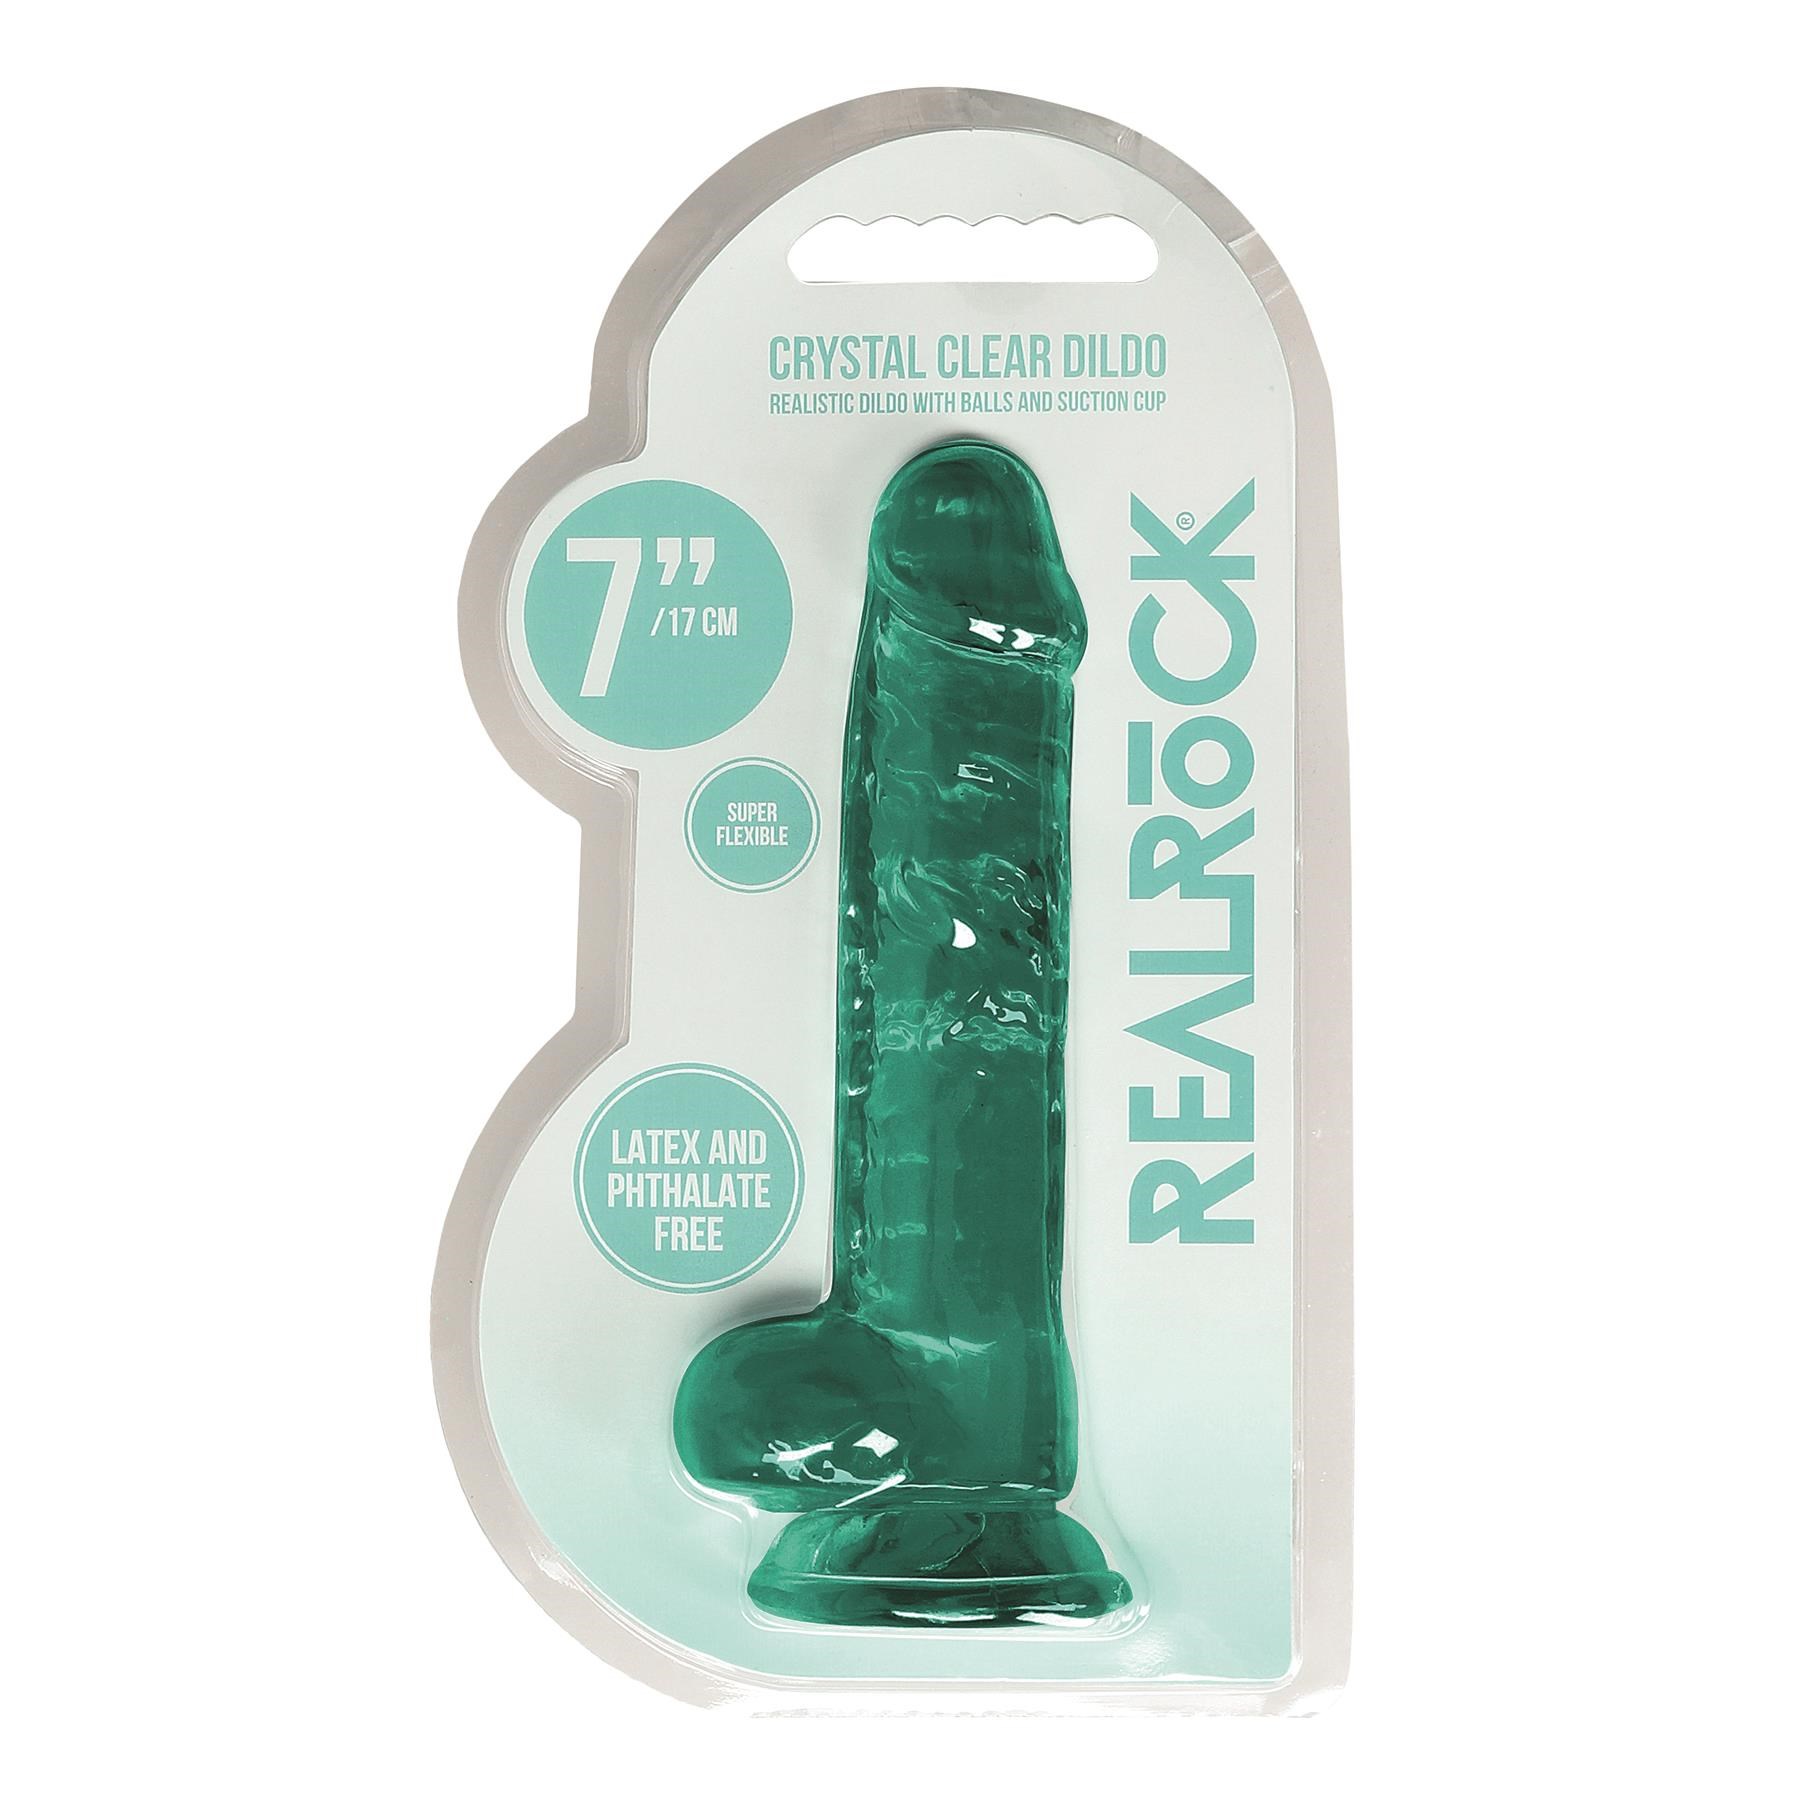 Realrock Realistic Dildo With Balls - 7 Inch - Packaging Shot